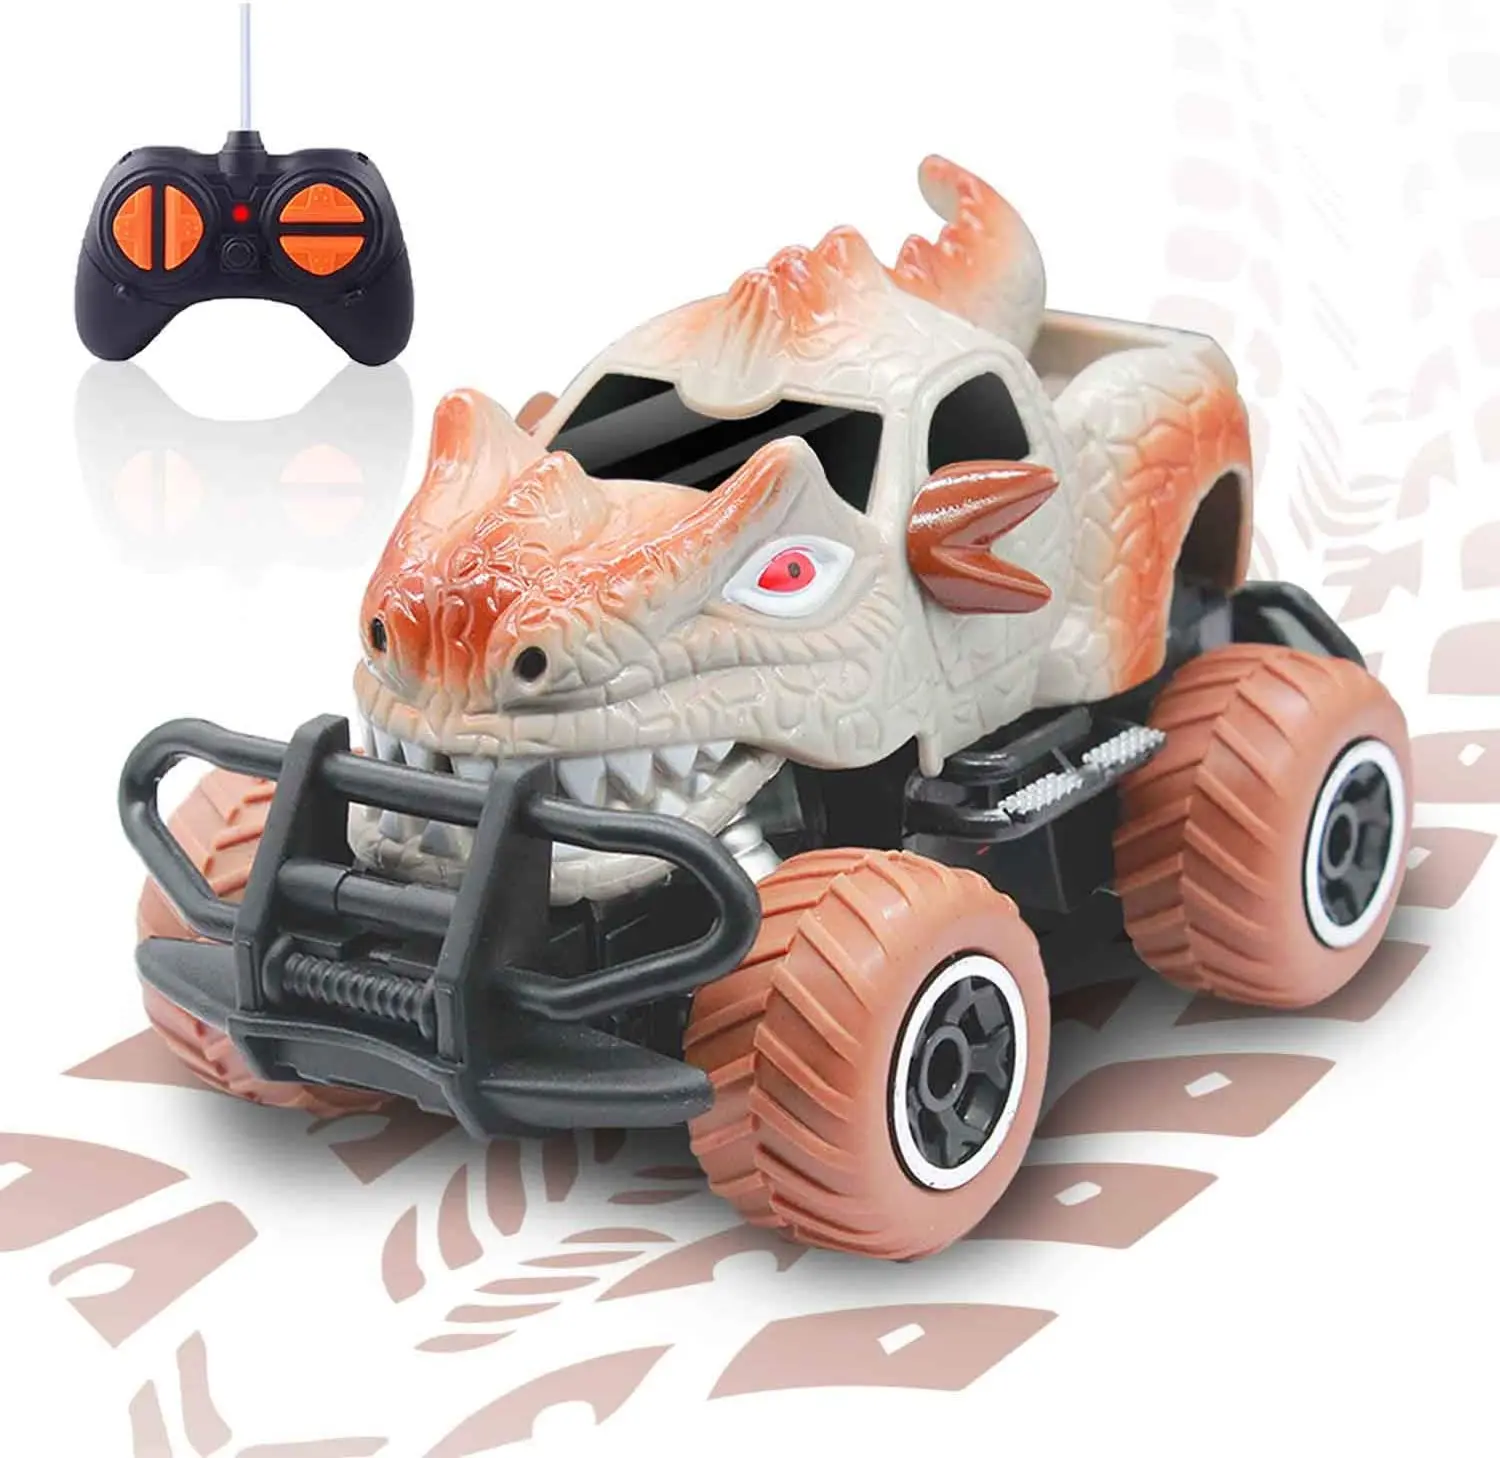 

Dinosaur Remote Control Car for 3 Year Old Boys,Dino Jurassic Trucks for Kids RC Race Cars, 2020 New Gifts Monster RC Trucks Toy